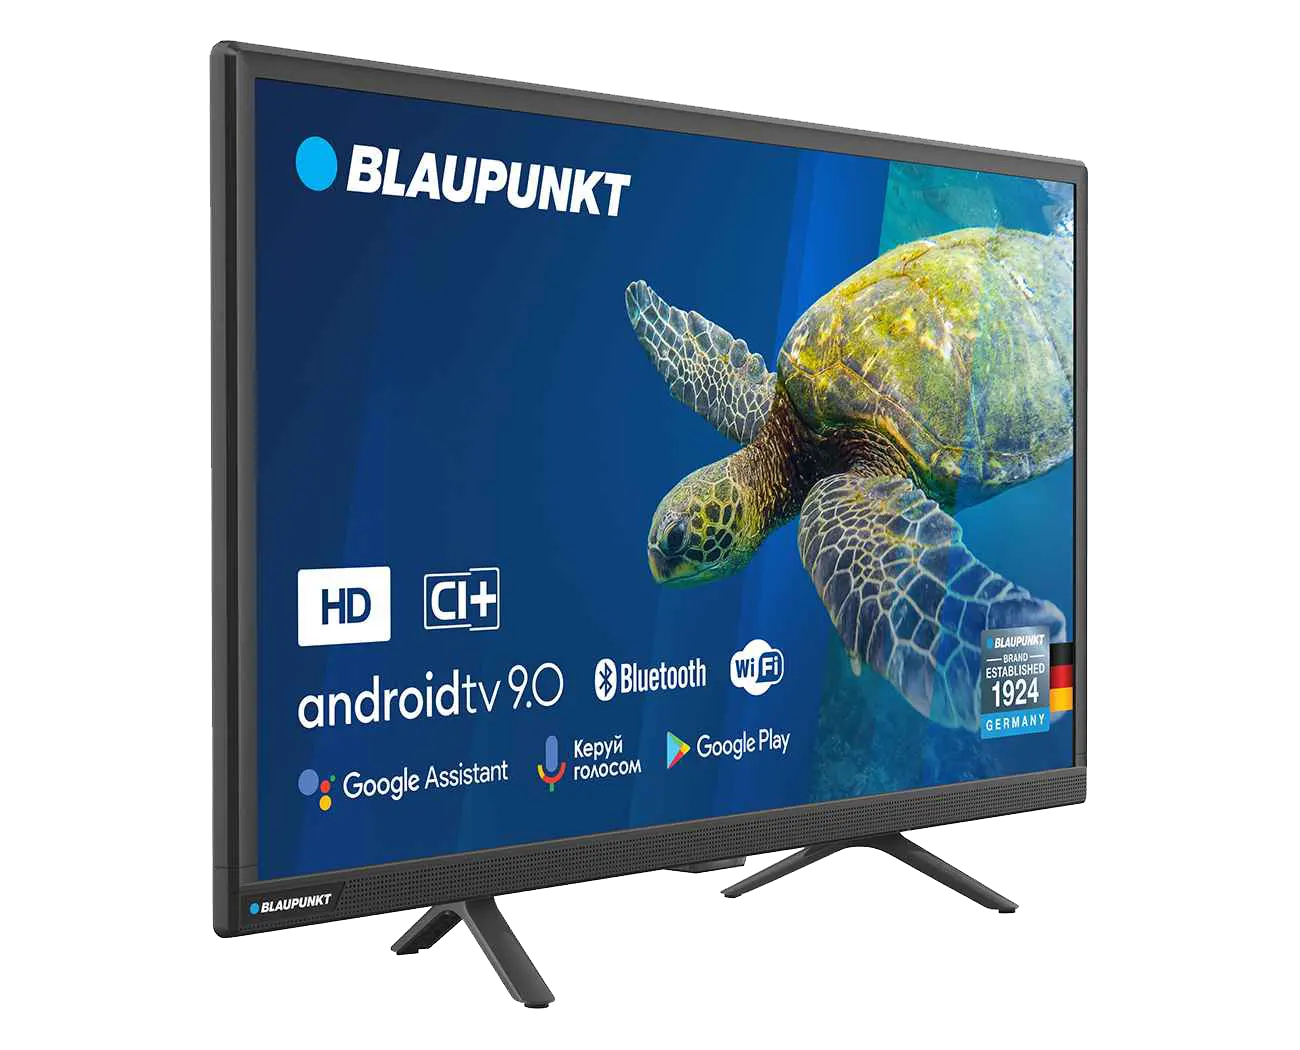 HD-Ready Android TV Blaupunkt 24HB5000